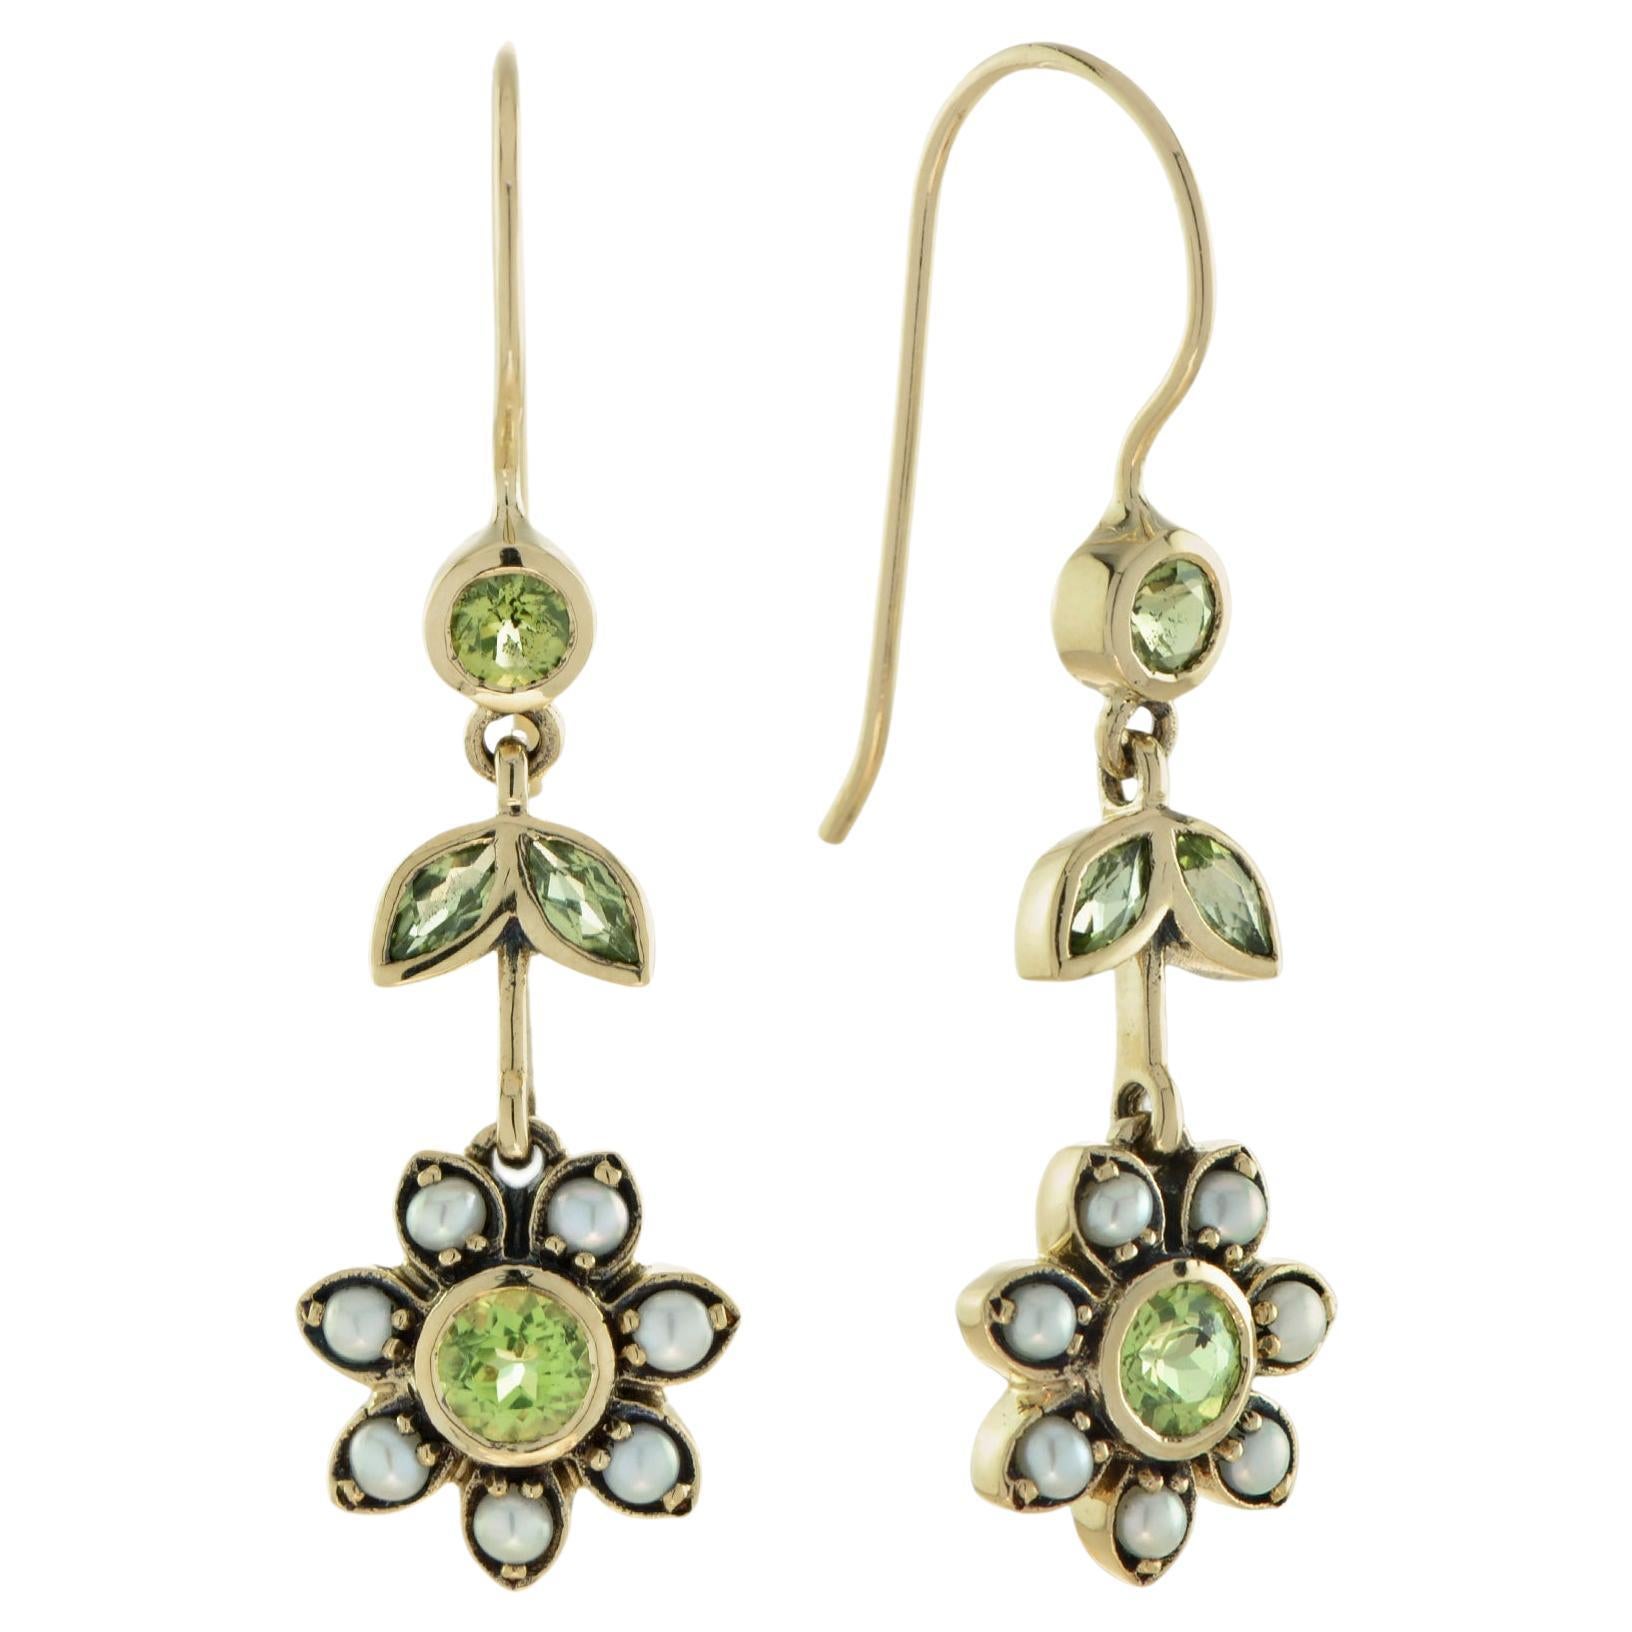 Peridot and Pearl Vintage Style Floral Drop Earrings in 9k Yellow Gold